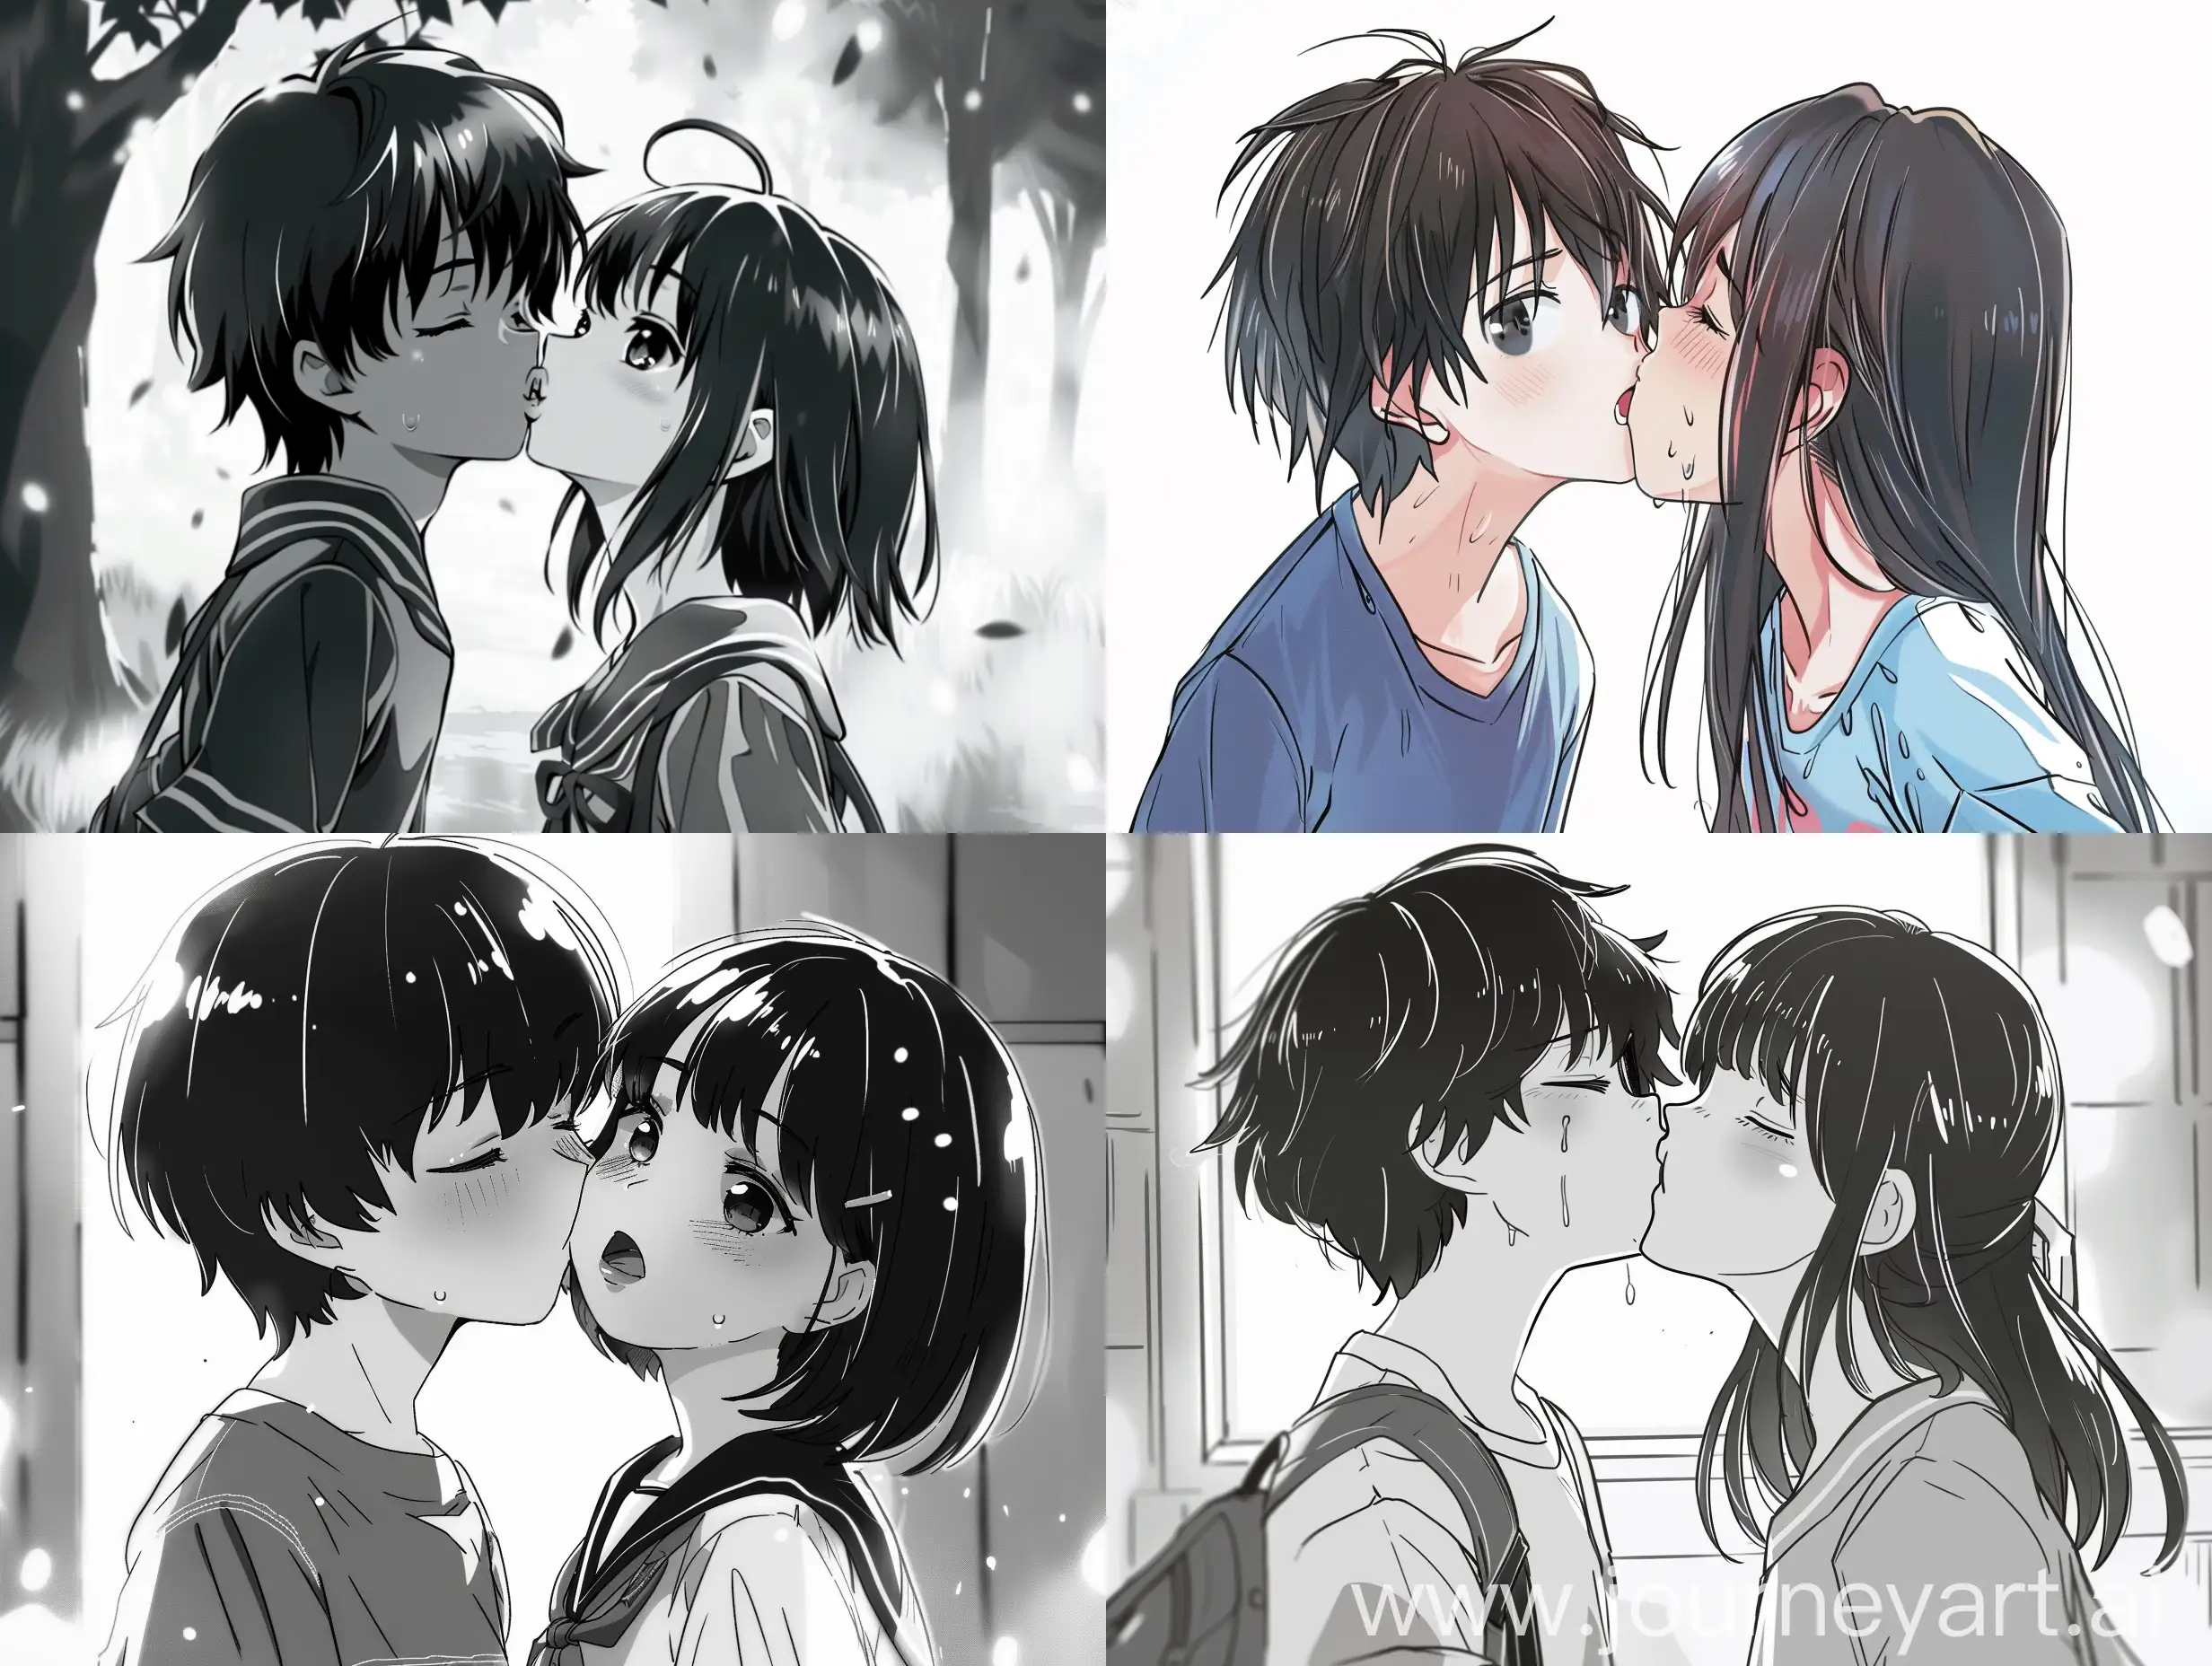 Anime-Boy-Forcefully-Kisses-Girl-Rejected-Romance-Scene